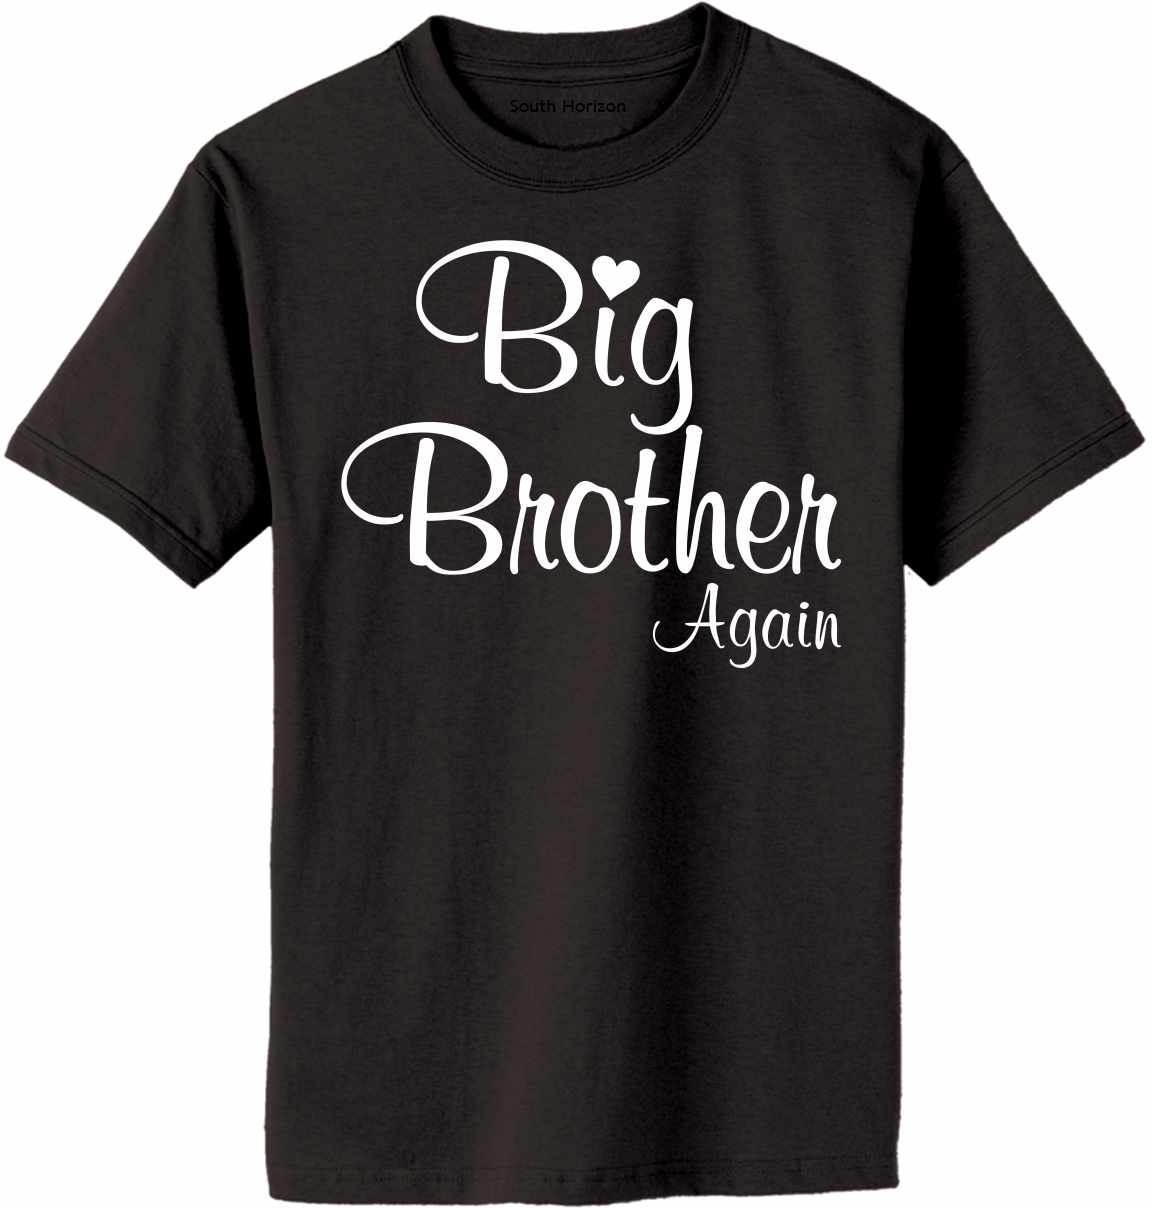 Big Brother Again on Adult T-Shirt